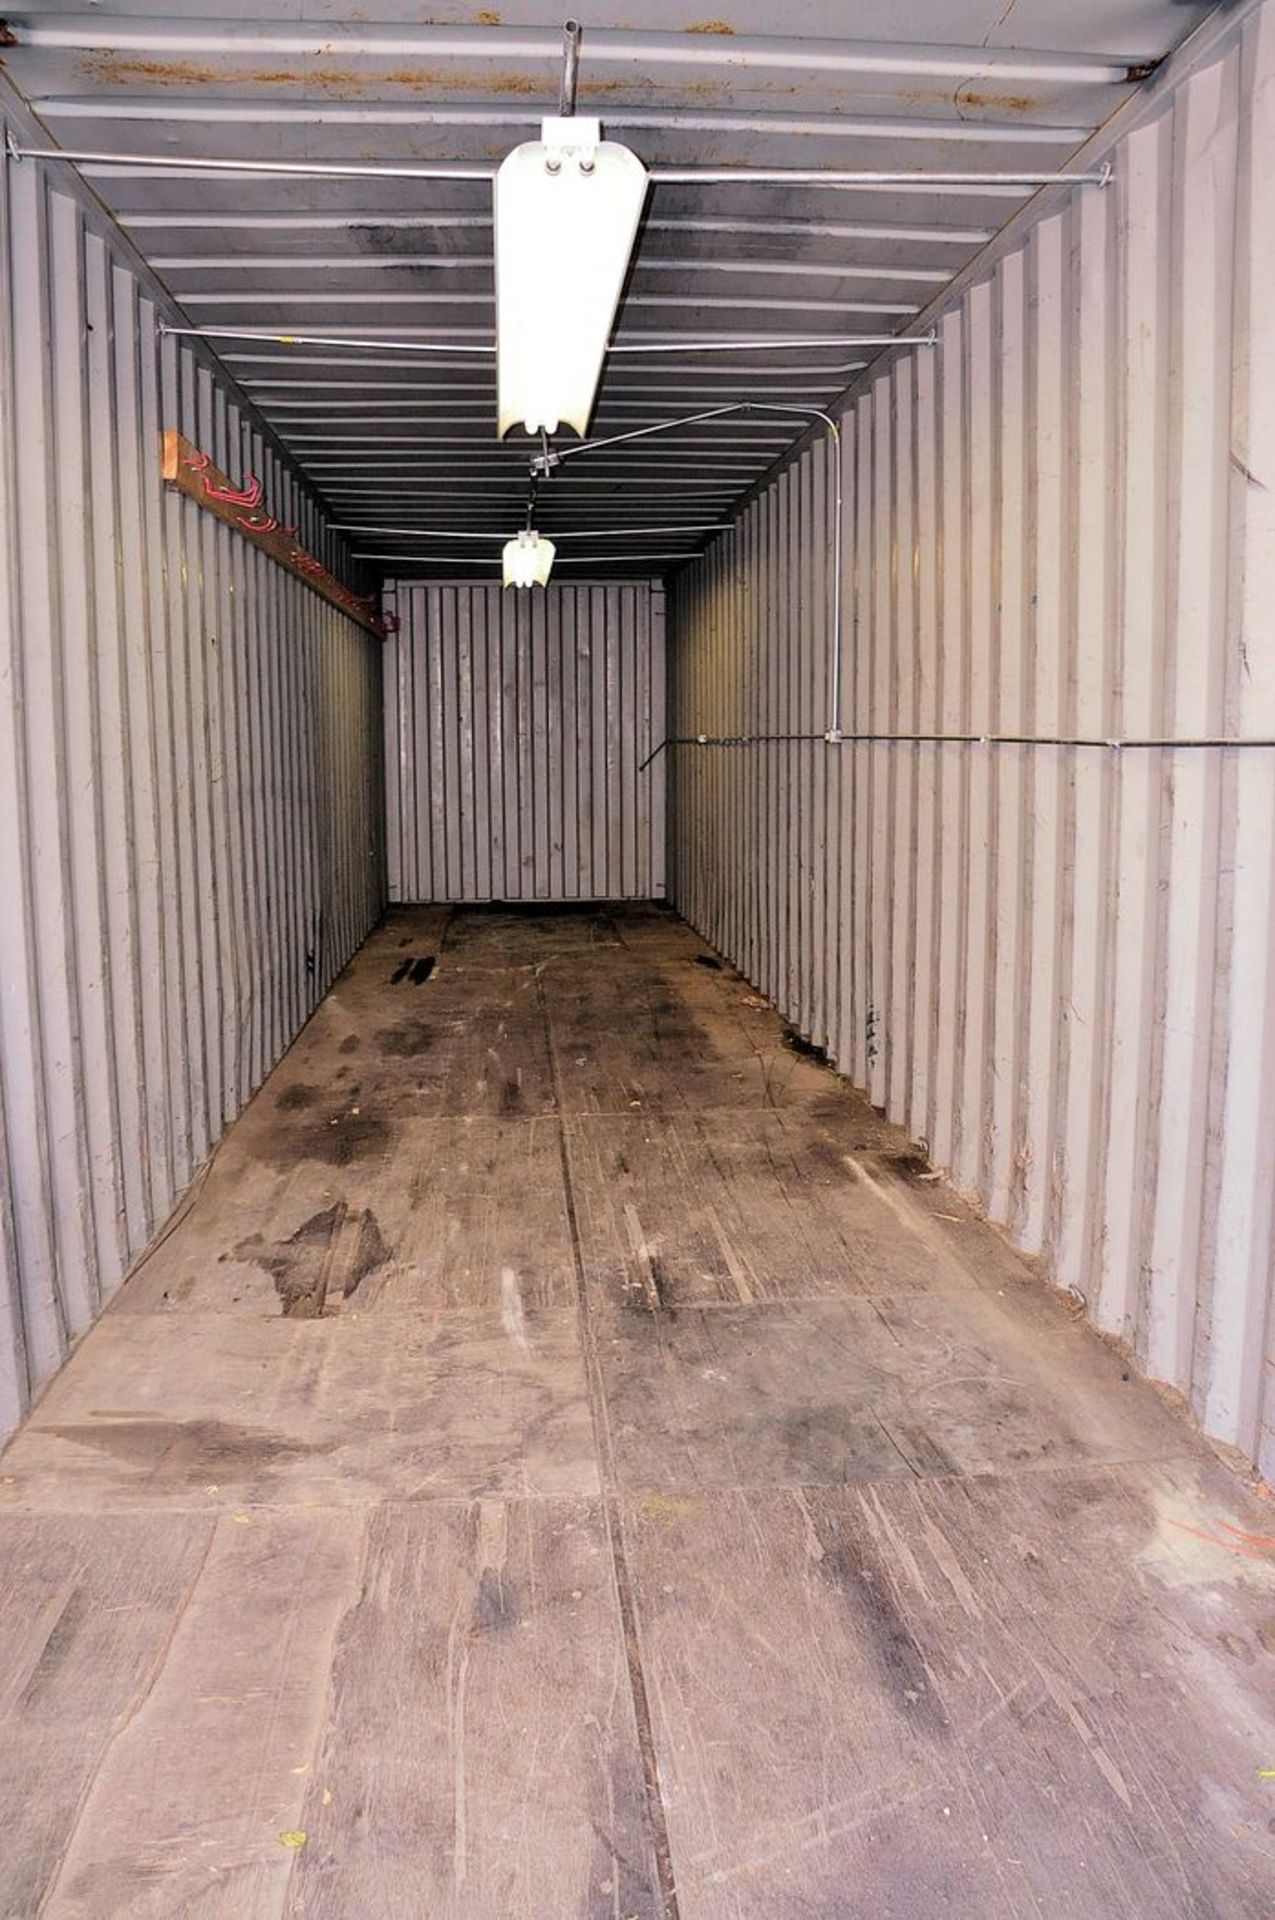 40 ft. Model ROK/010-KR Type HSM-731 Shipping/Storage Container, S/N: HSMF-96420 (1991); 40 ft. long - Image 3 of 5